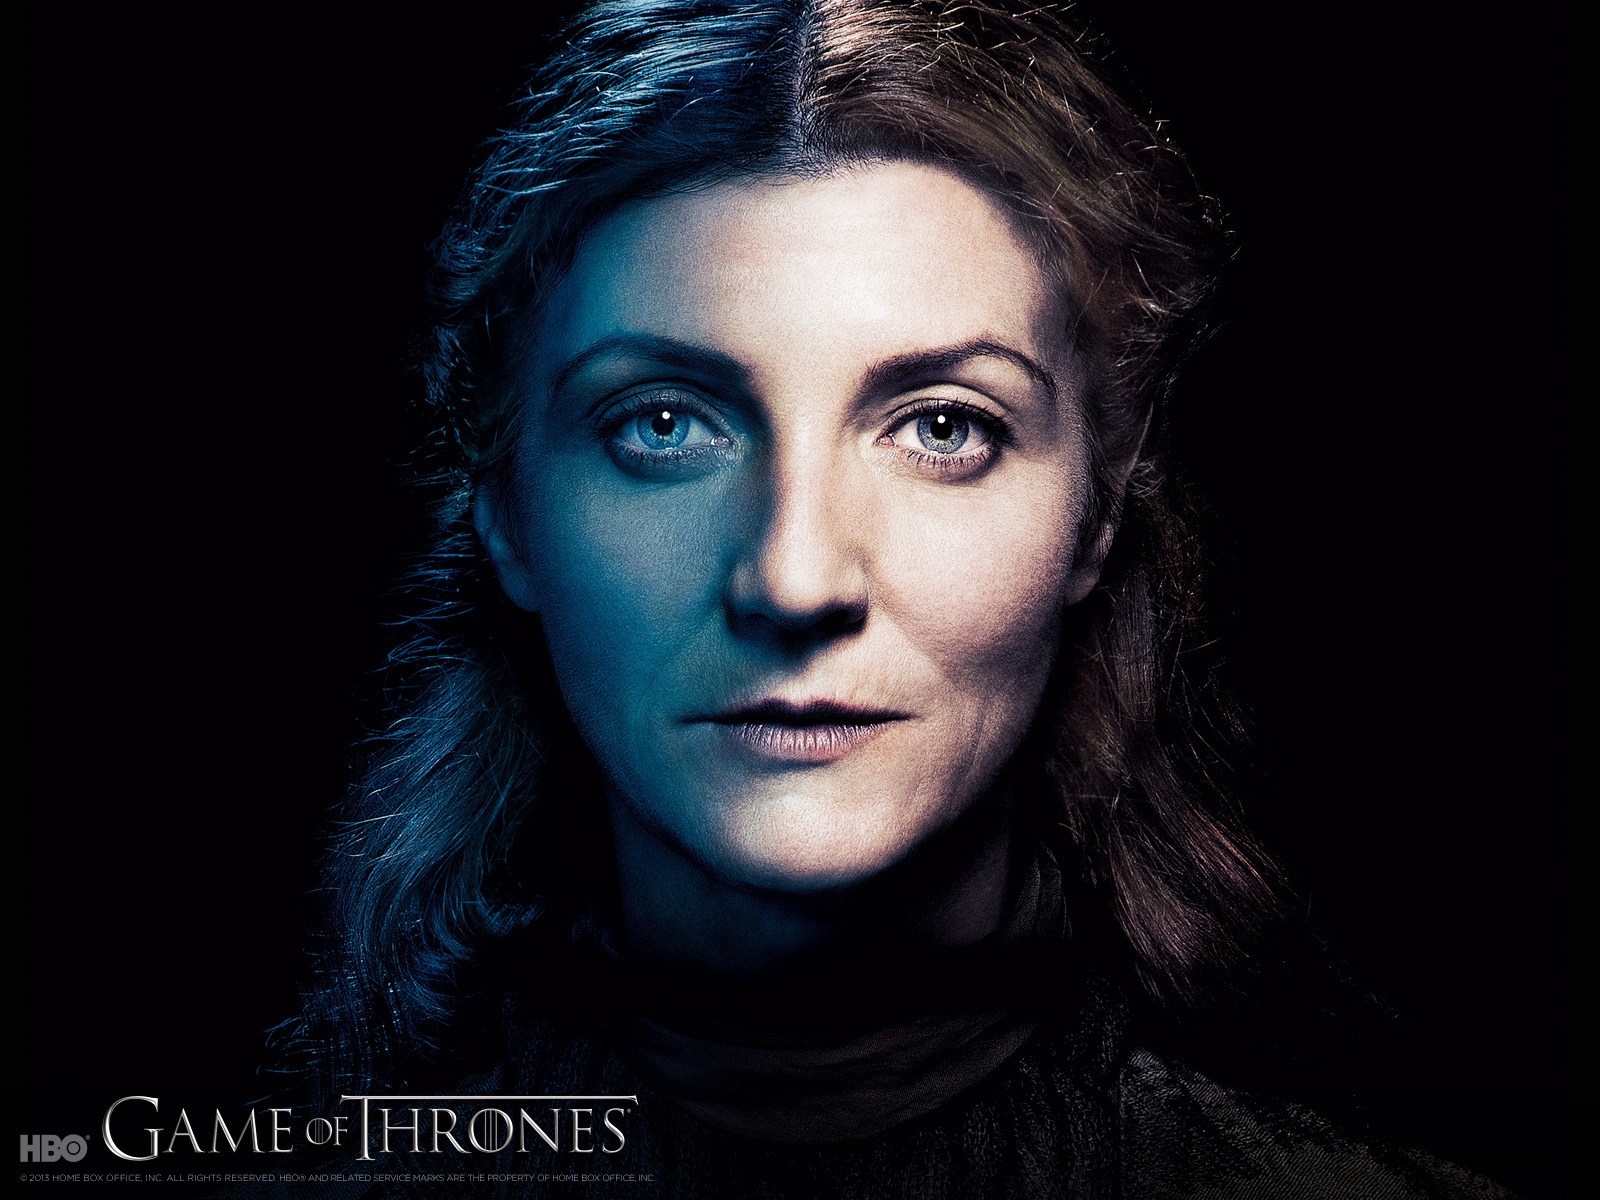 Catelyn Stark in Game of Thrones for 1600 x 1200 resolution